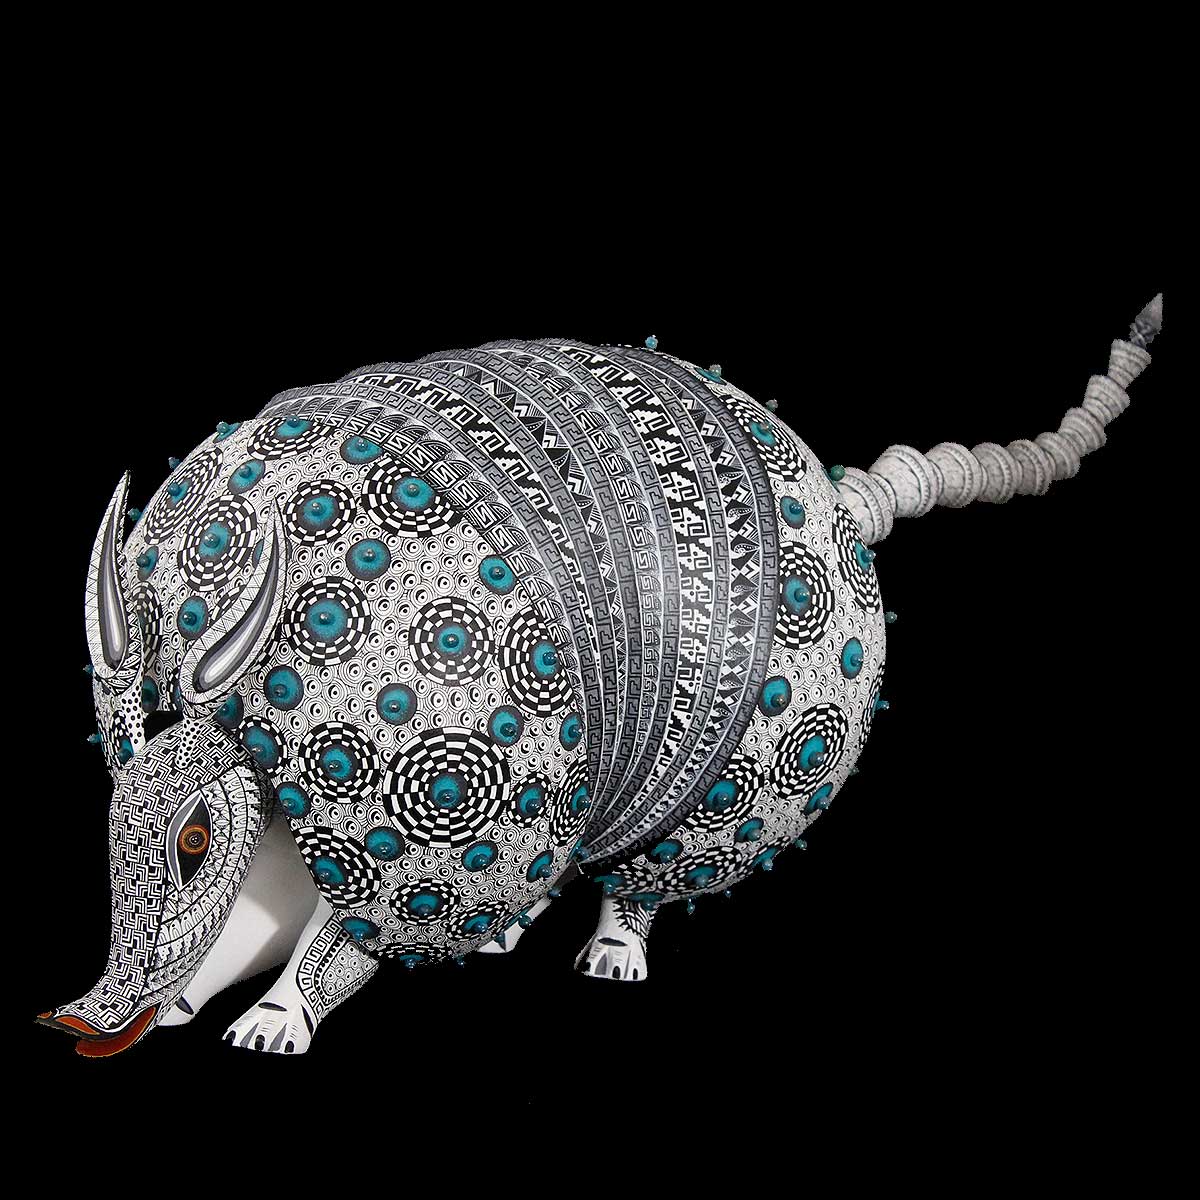 Jacobo and Maria Angeles Jacobo and Maria Angeles: Armadillo Encrusted with Azurite Armadillo